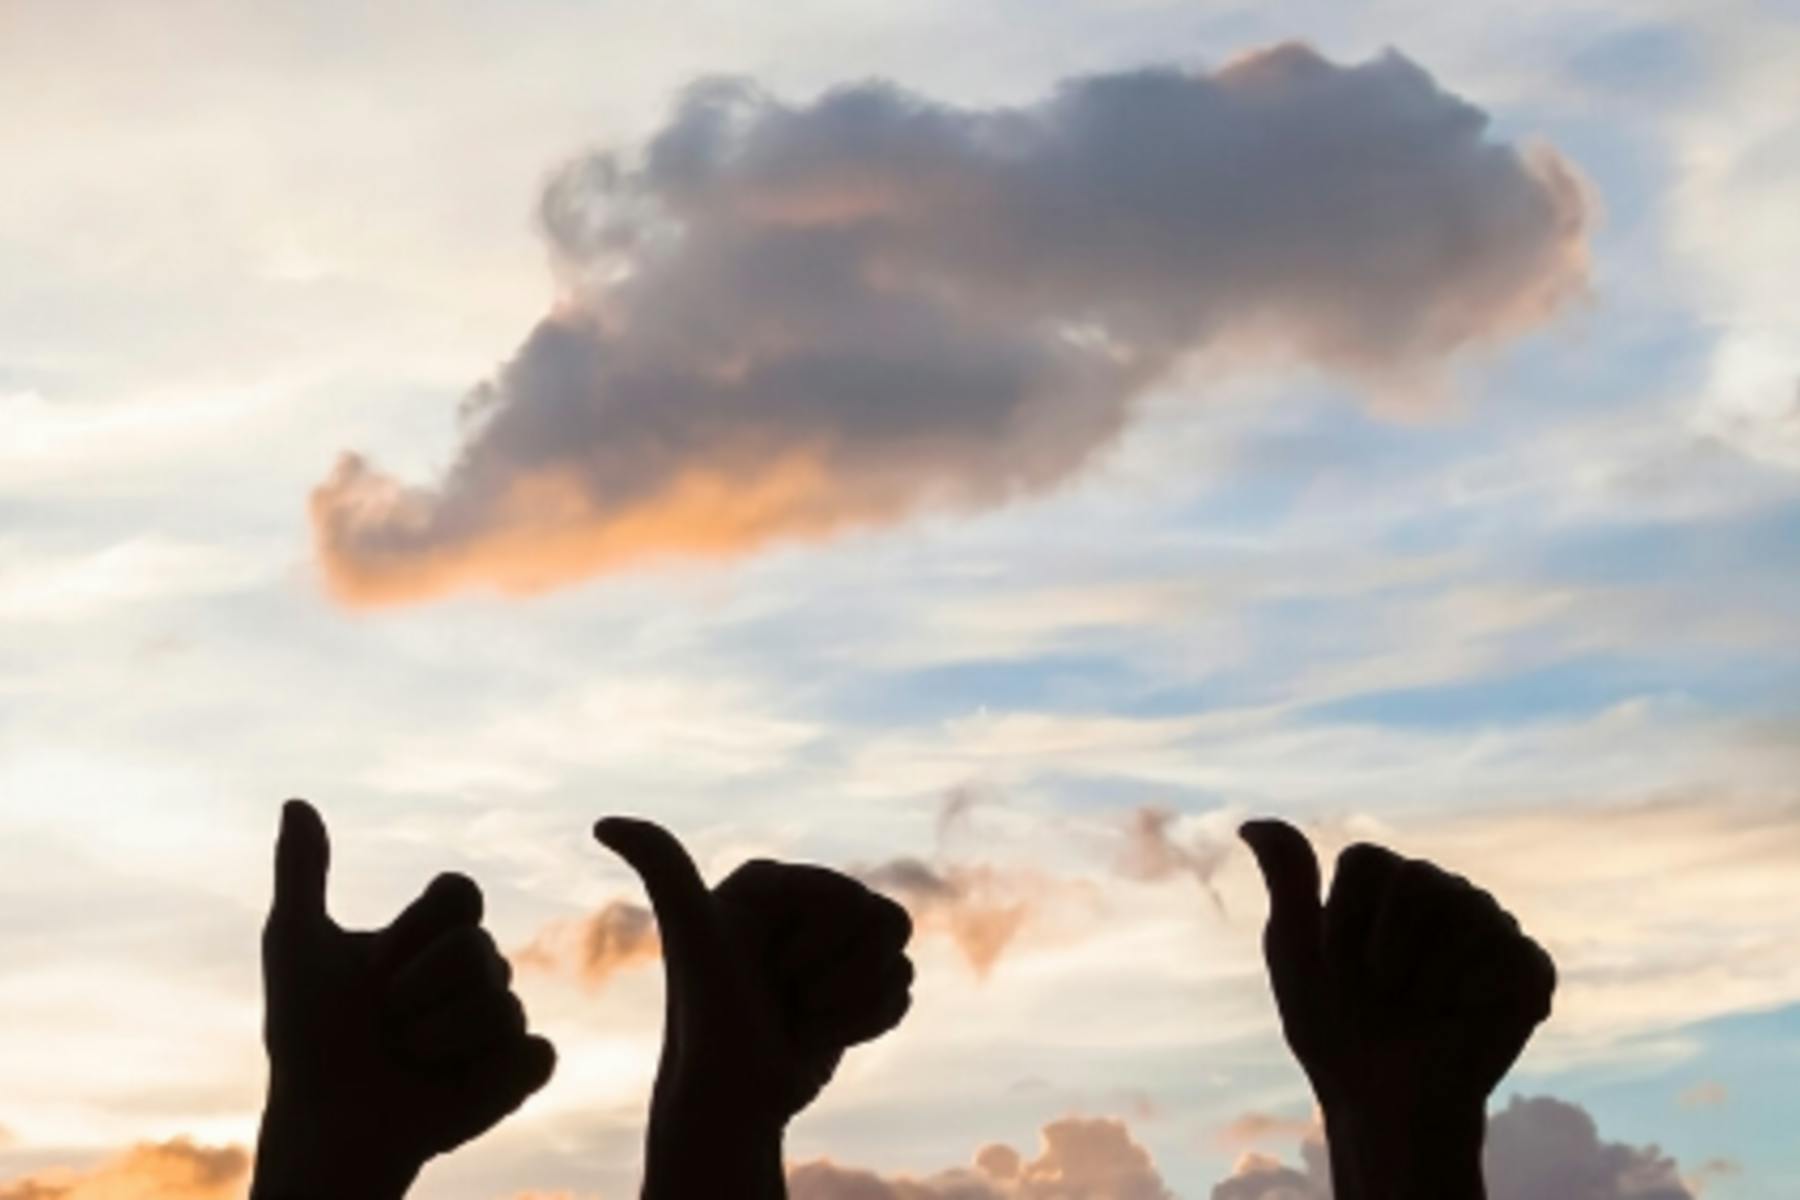 A photographs of 3 hands with thumbs up to the sky. 